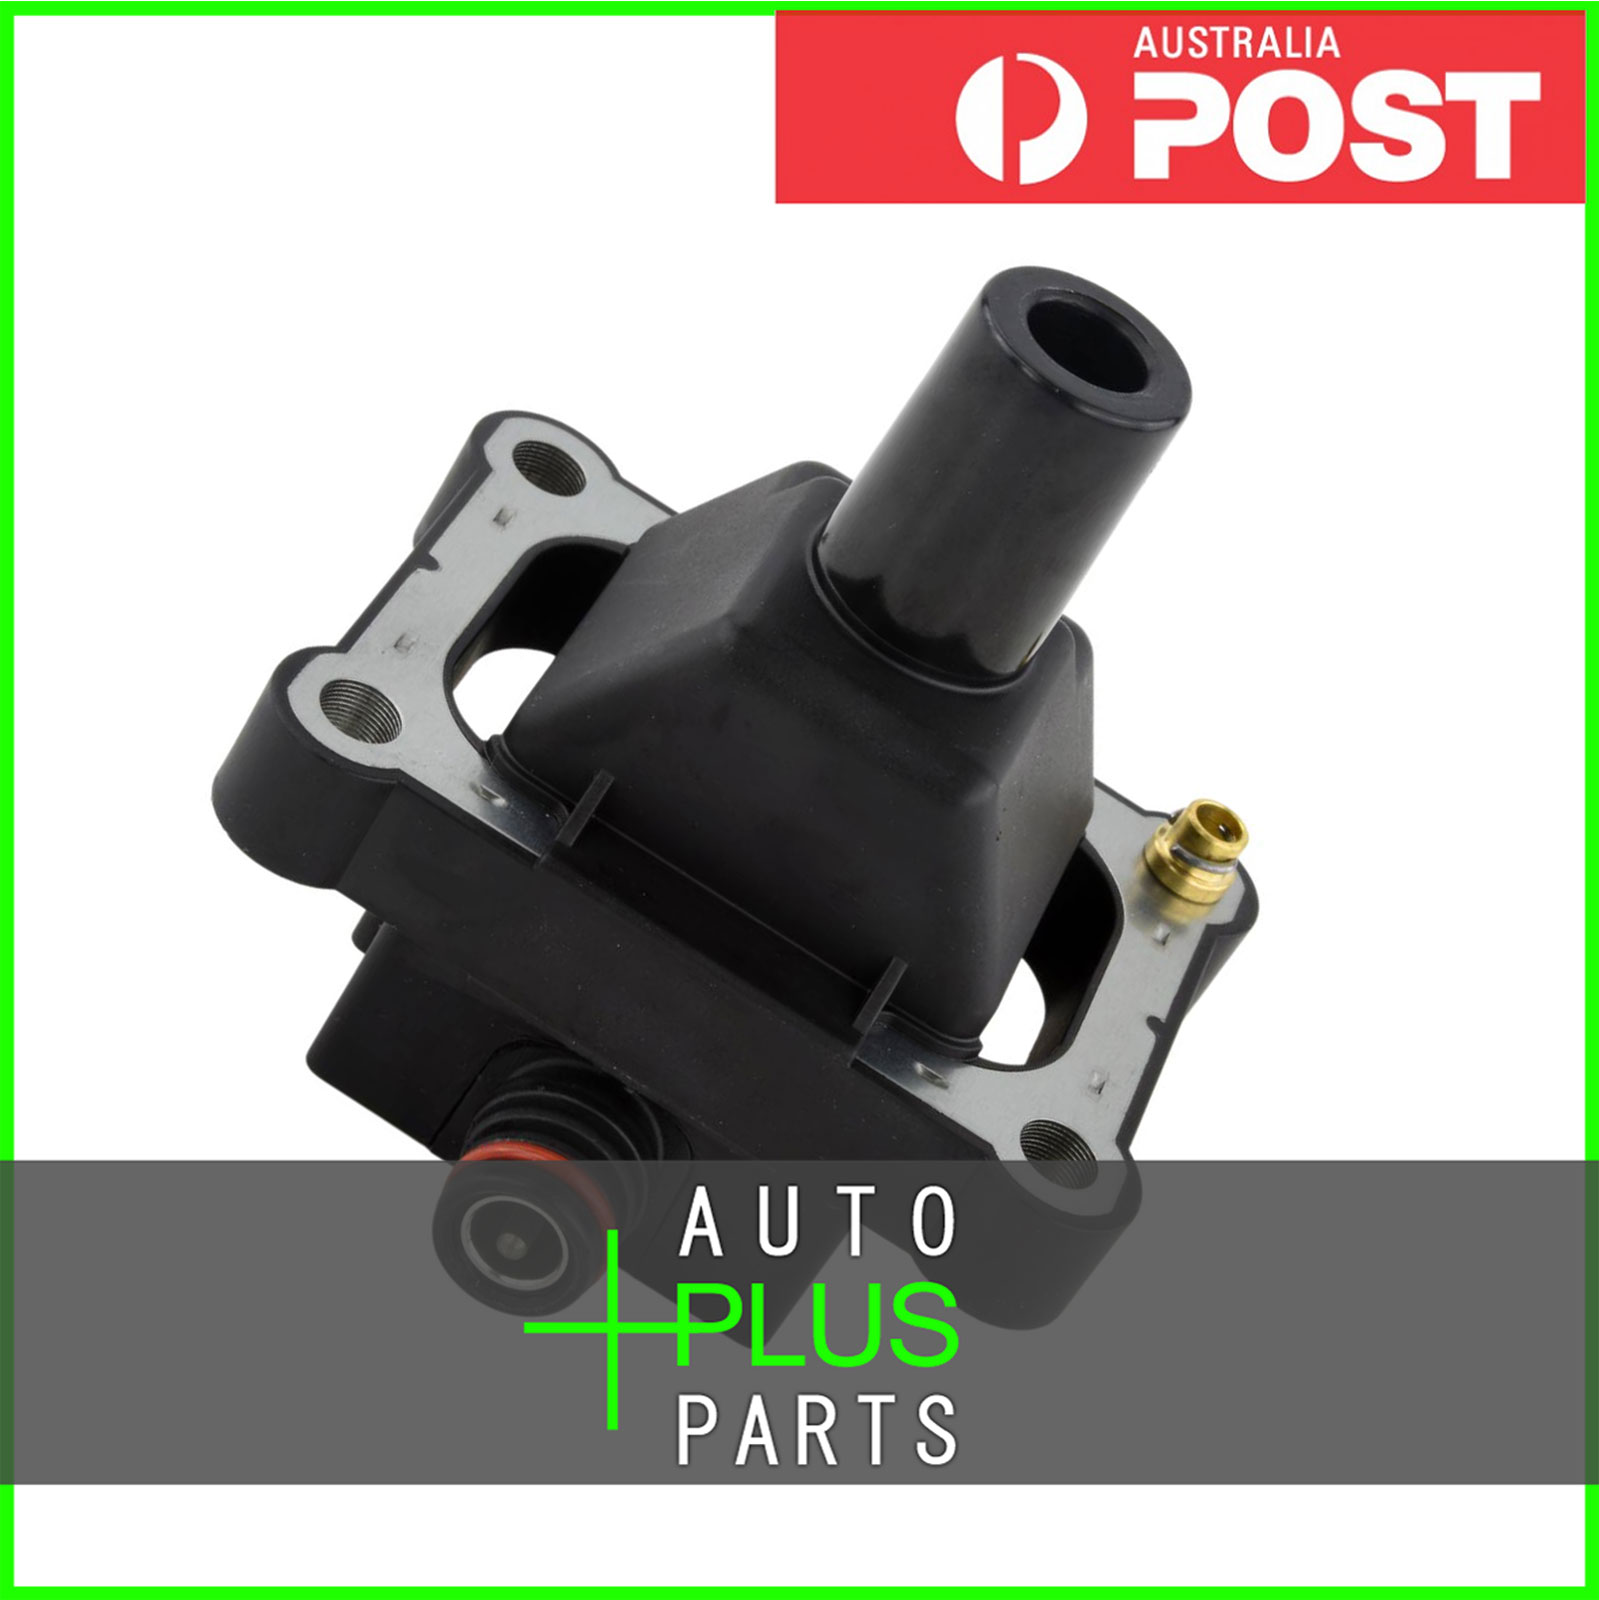 Fits MERCEDES BENZ 300 CE IGNITION COIL - USA Product Photo